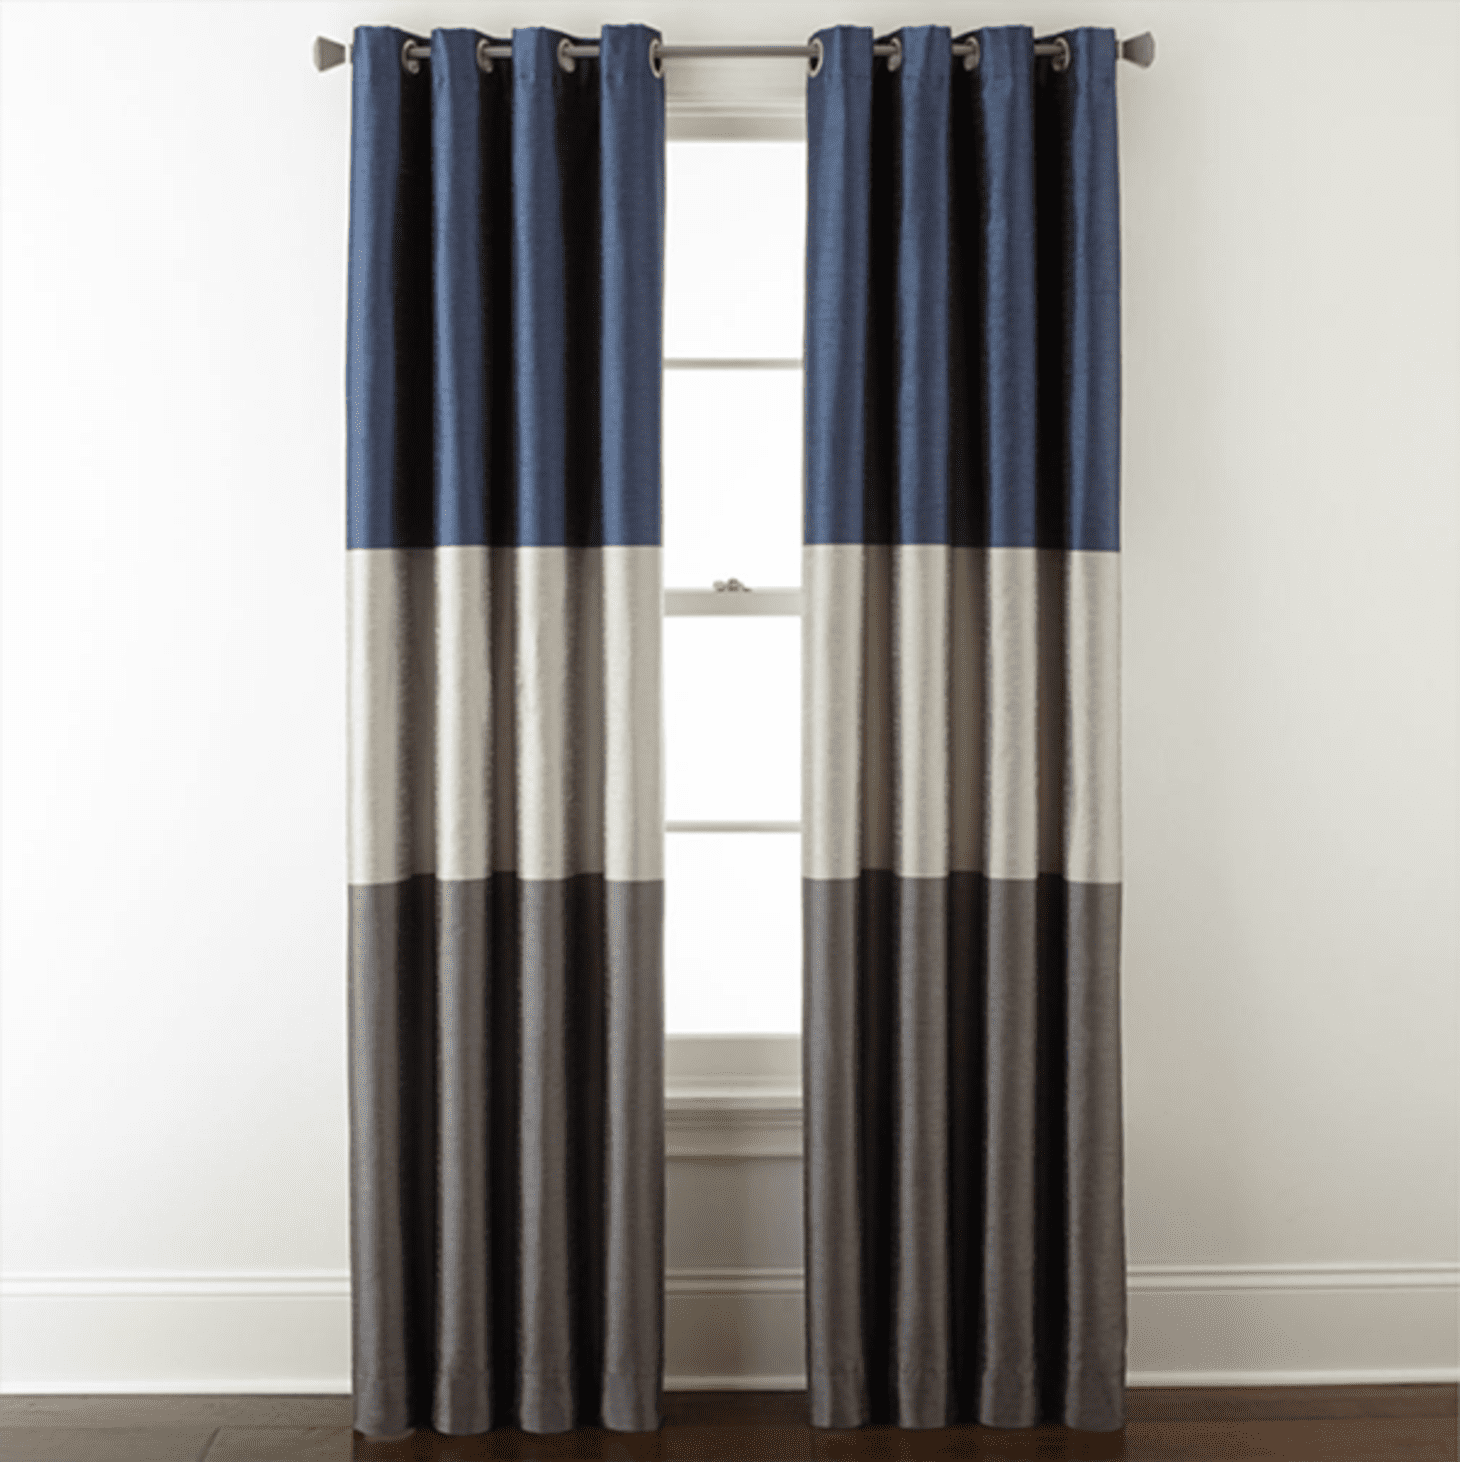 Best Insulated Blackout Curtains | Apartment Therapy